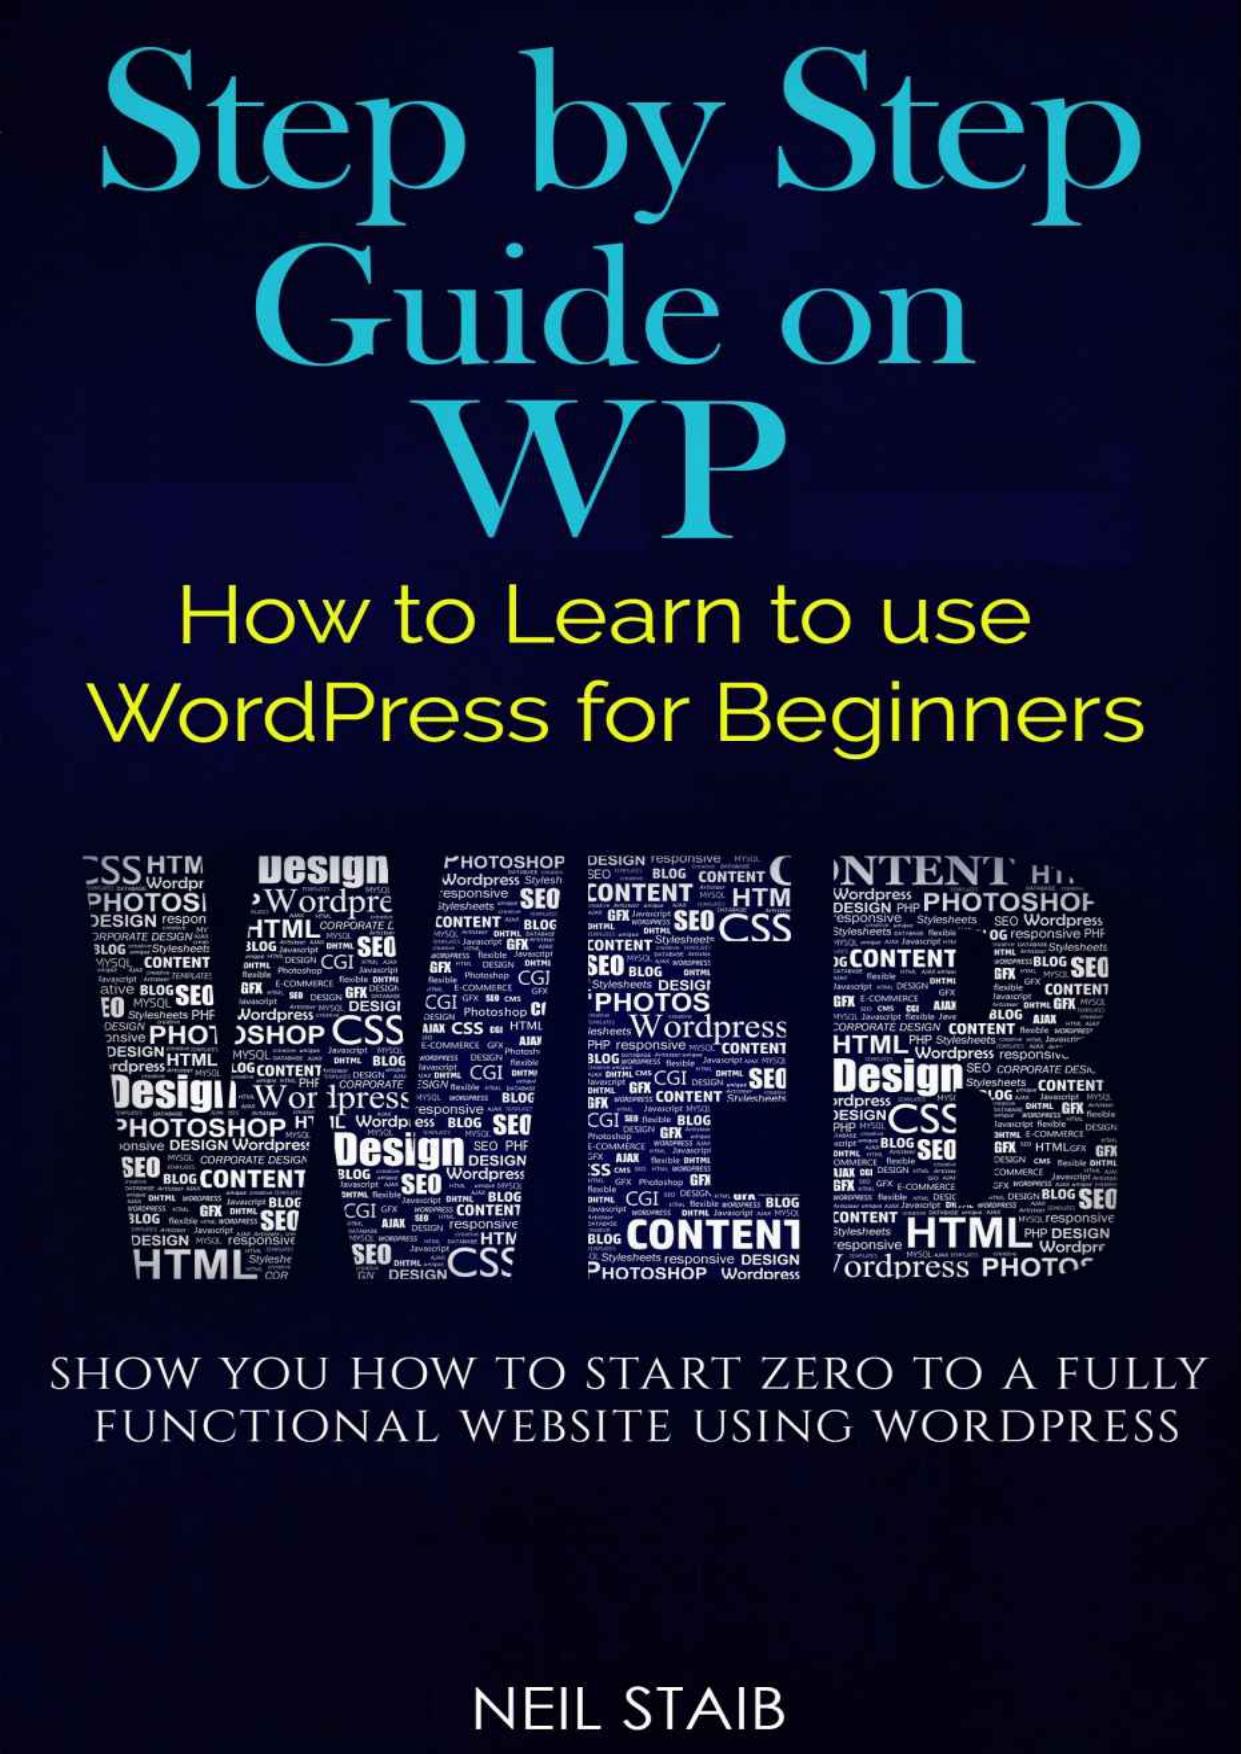 Step by Step Guide on WP: How to Learn to use WordPress for Beginners